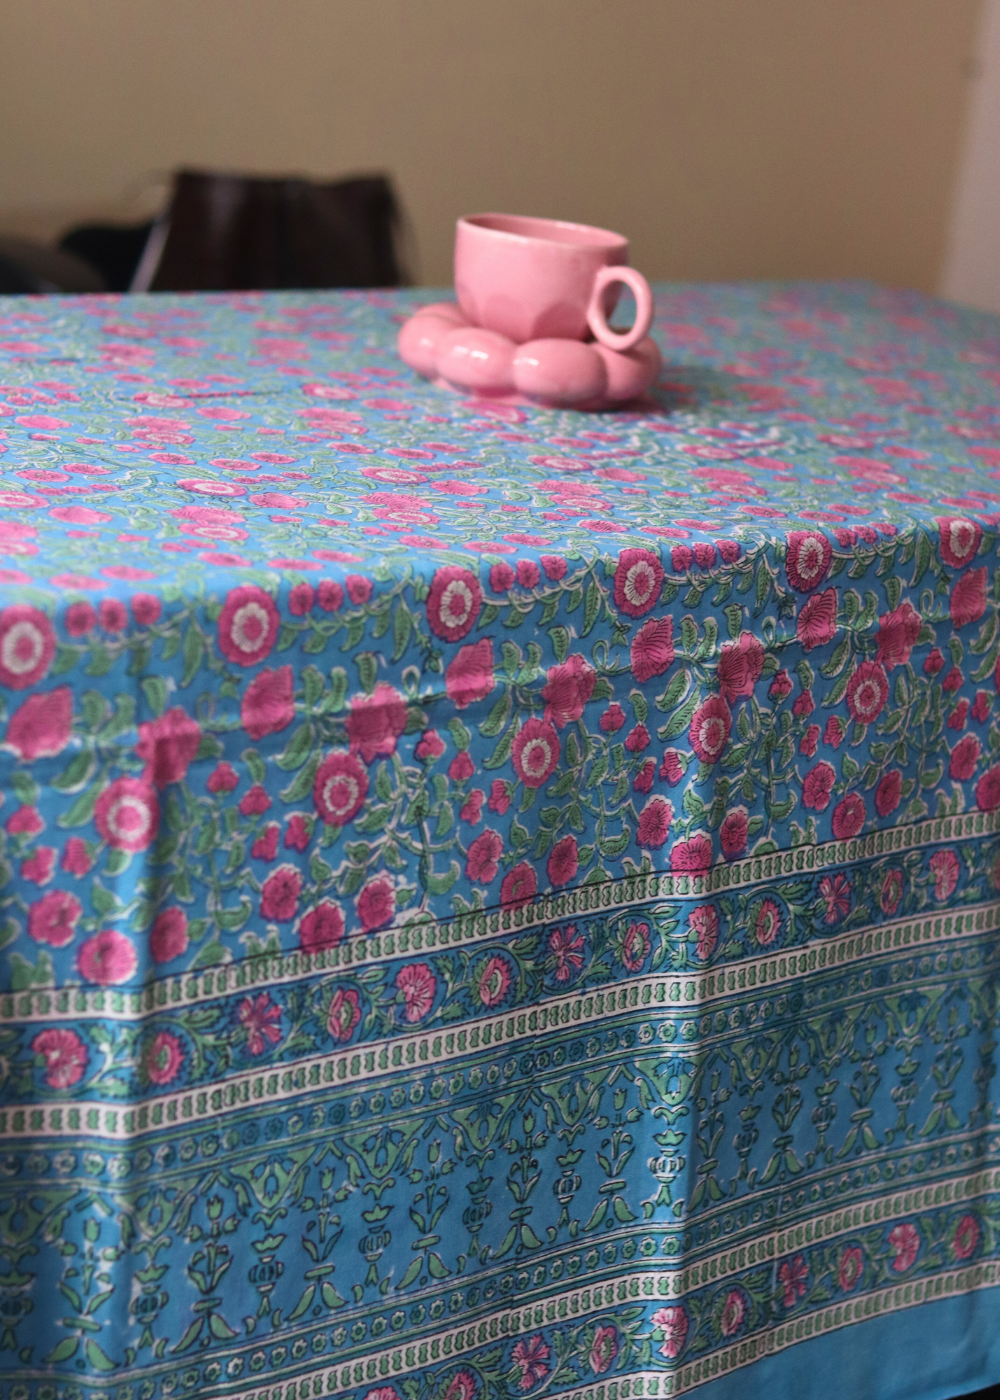 Handmade table cloth with cup & saucer on it